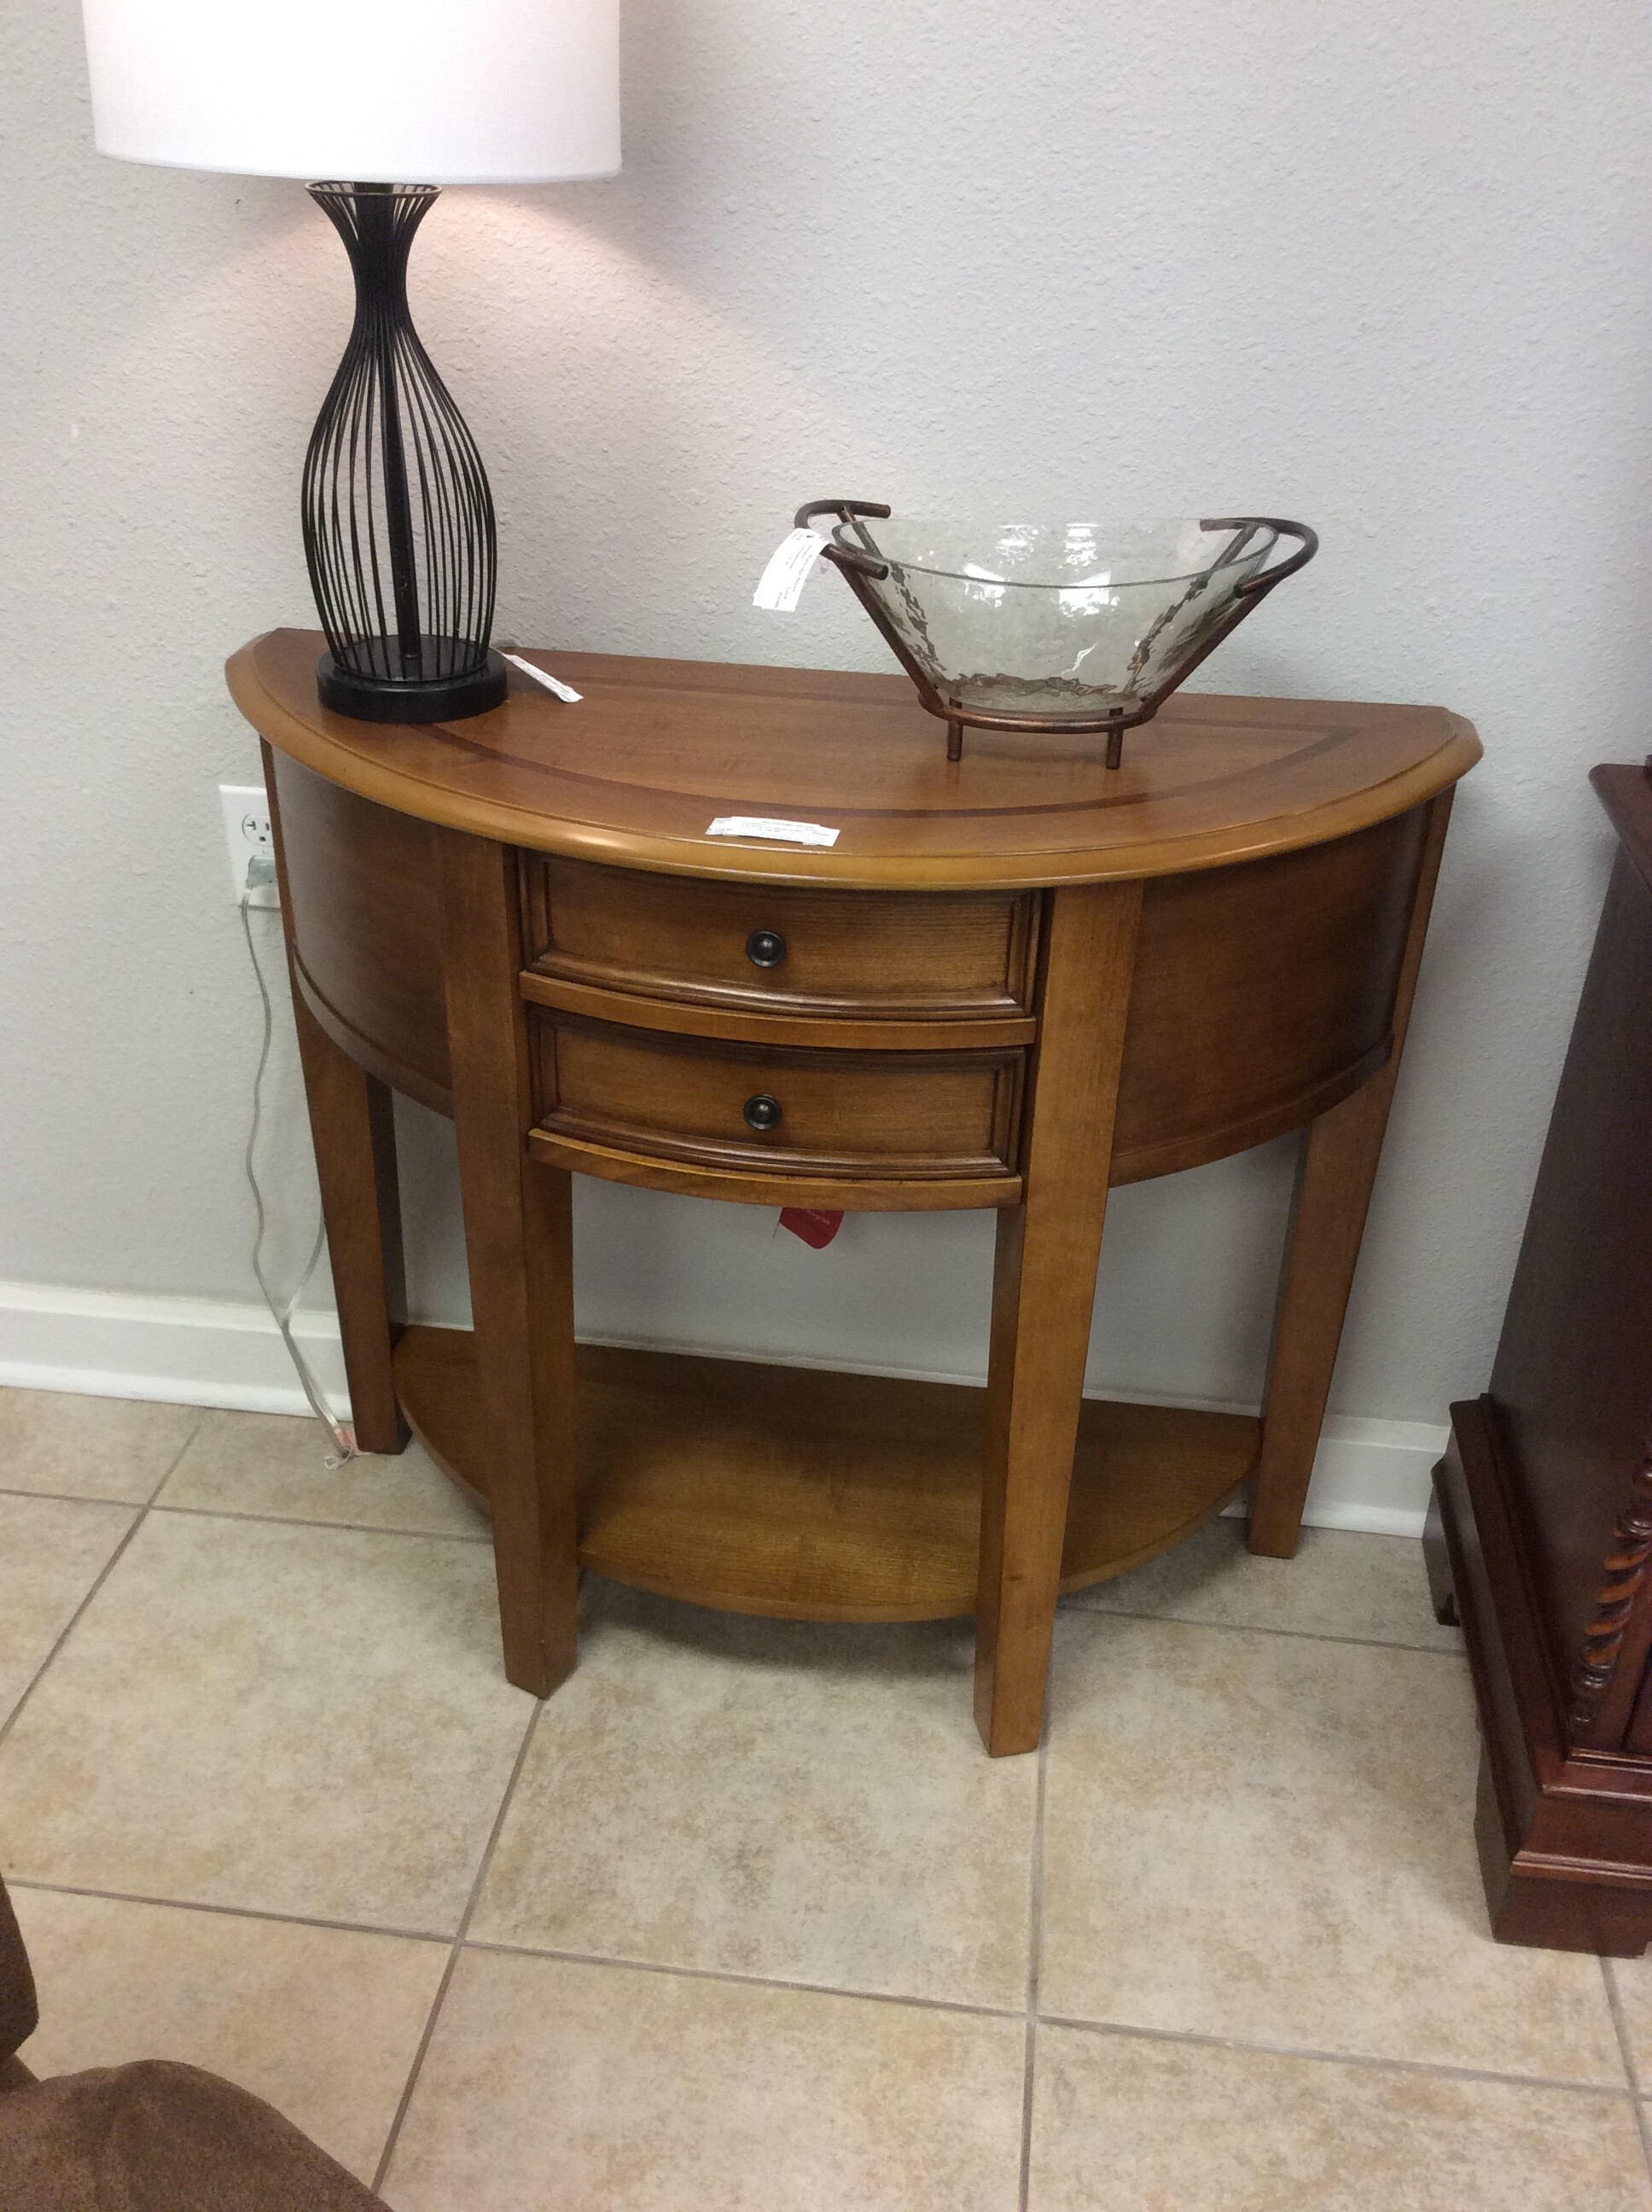 This 1/2 moon entry table has a medium wood finish and 2 center drawers,